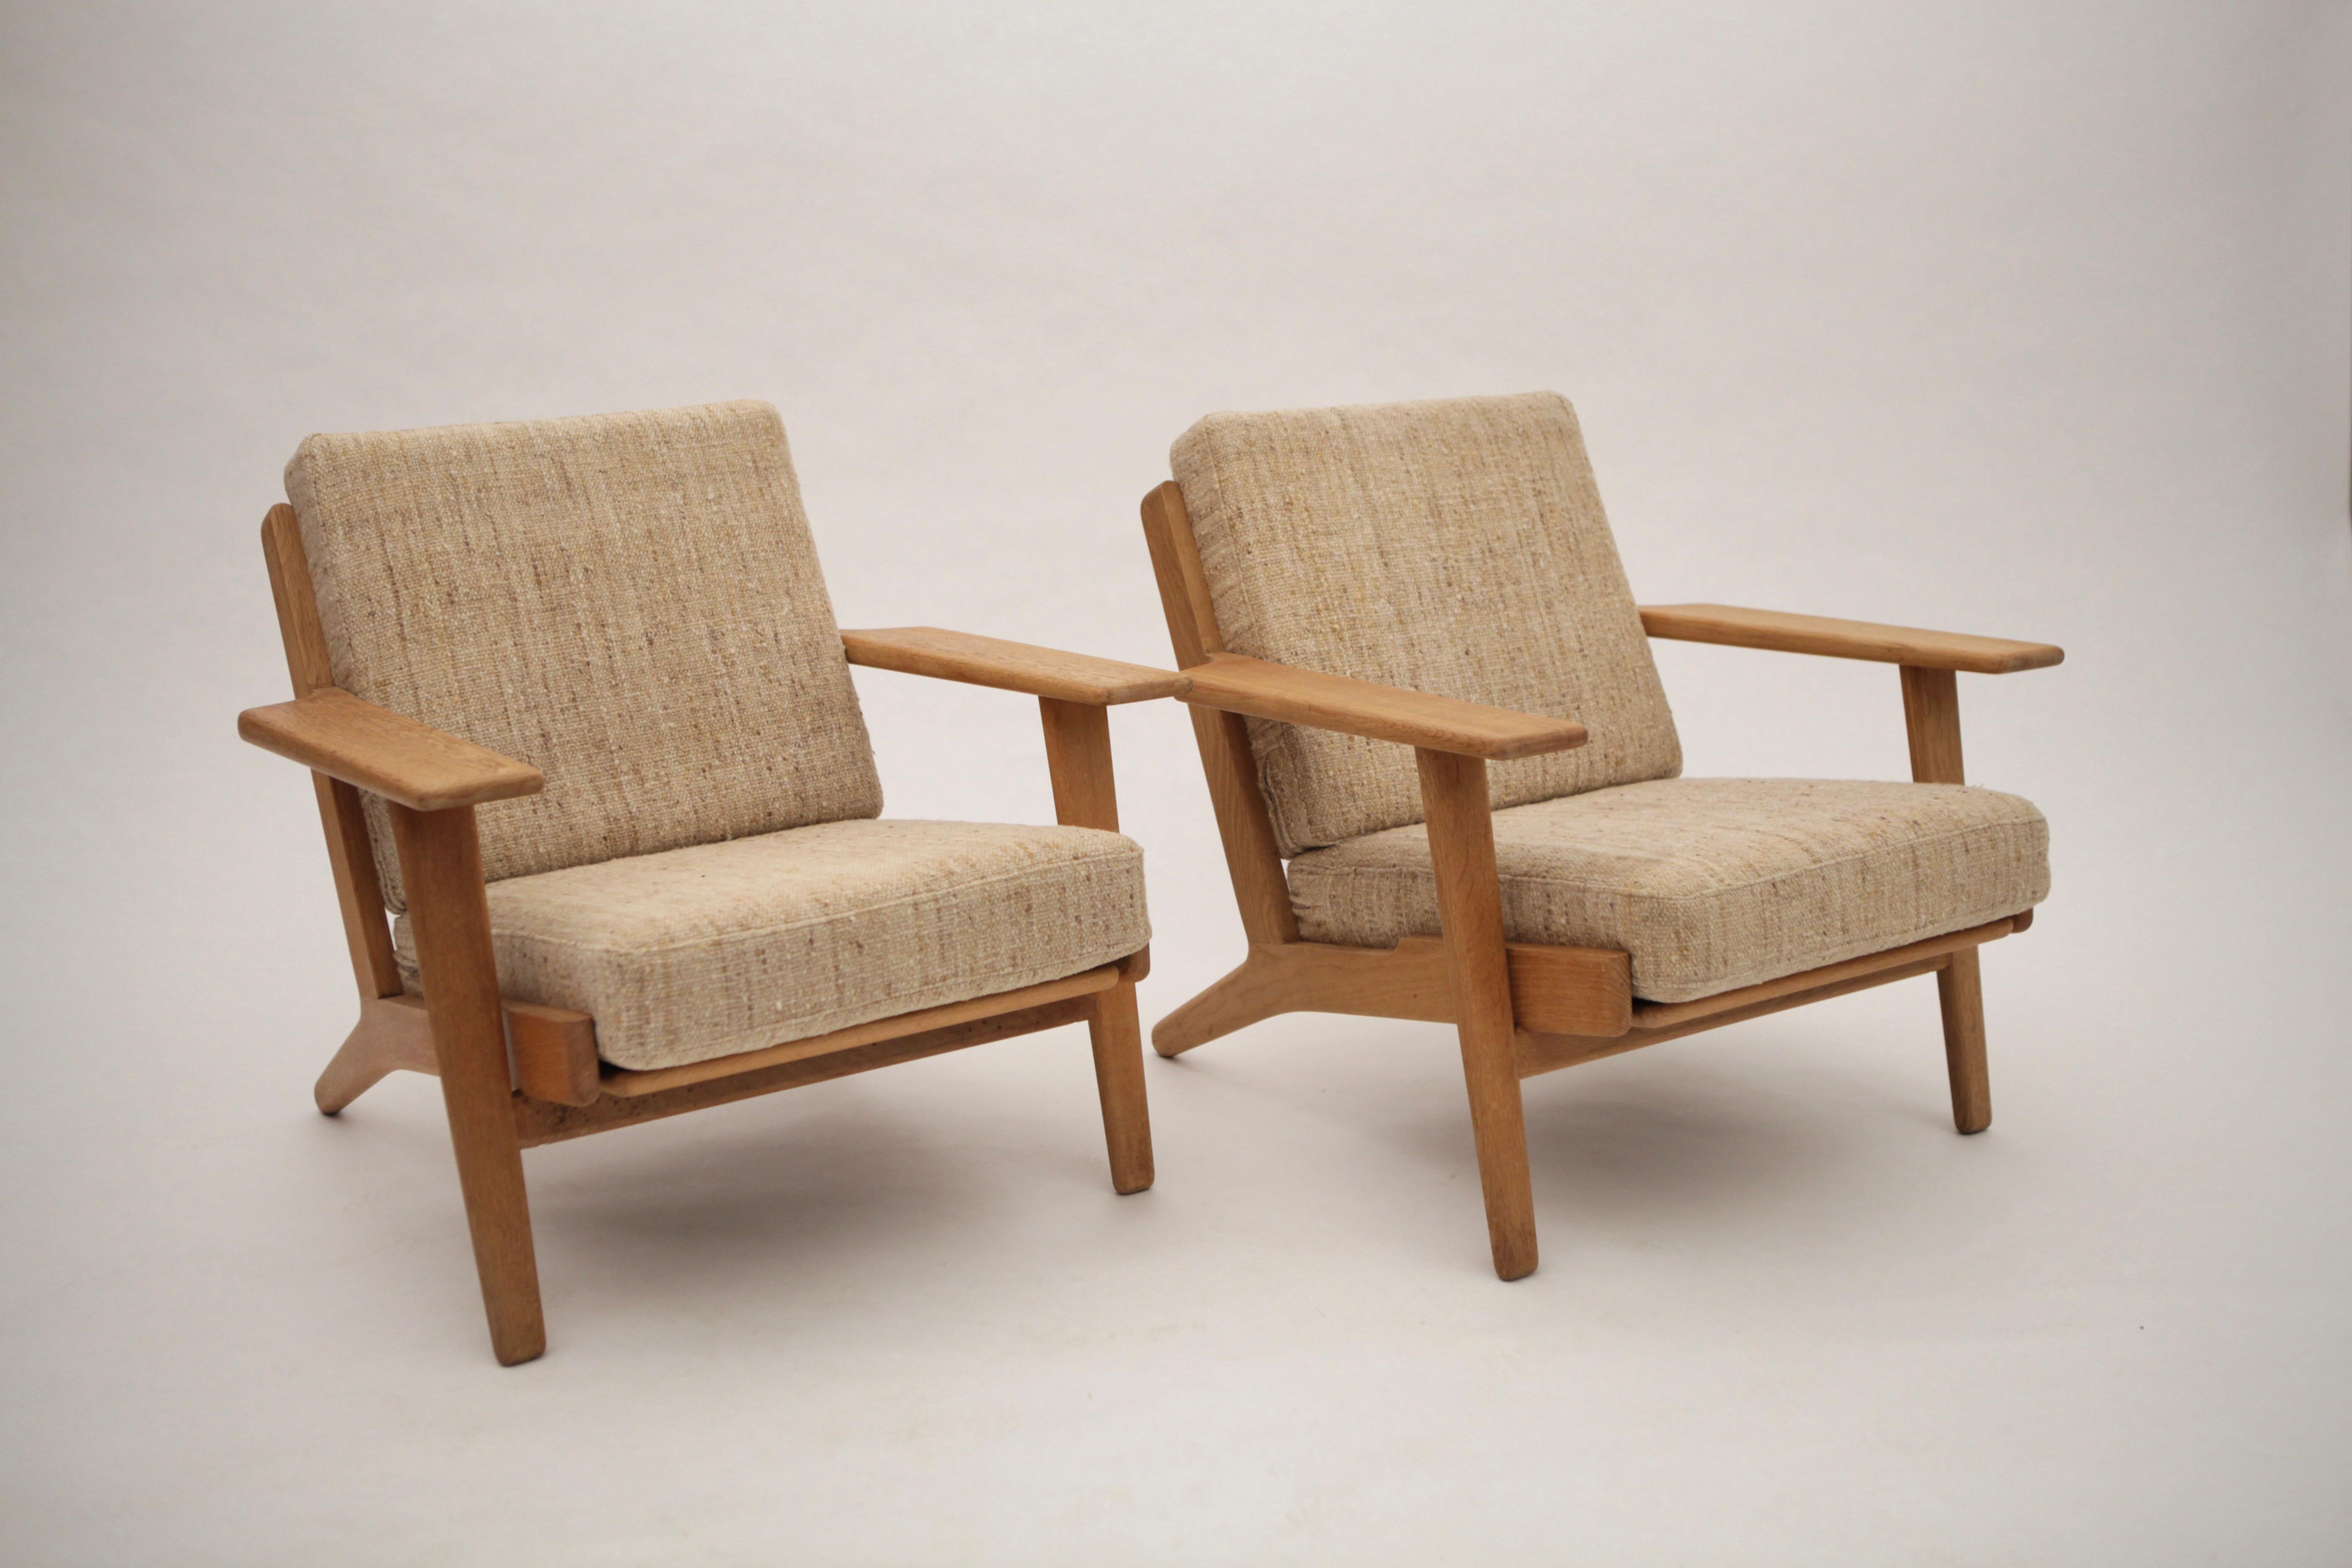 Hans J. Wegner, pair of GE-290 lounge chairs in oak and original upholstery, Denmark 1960s.
Very nice vintage condition.